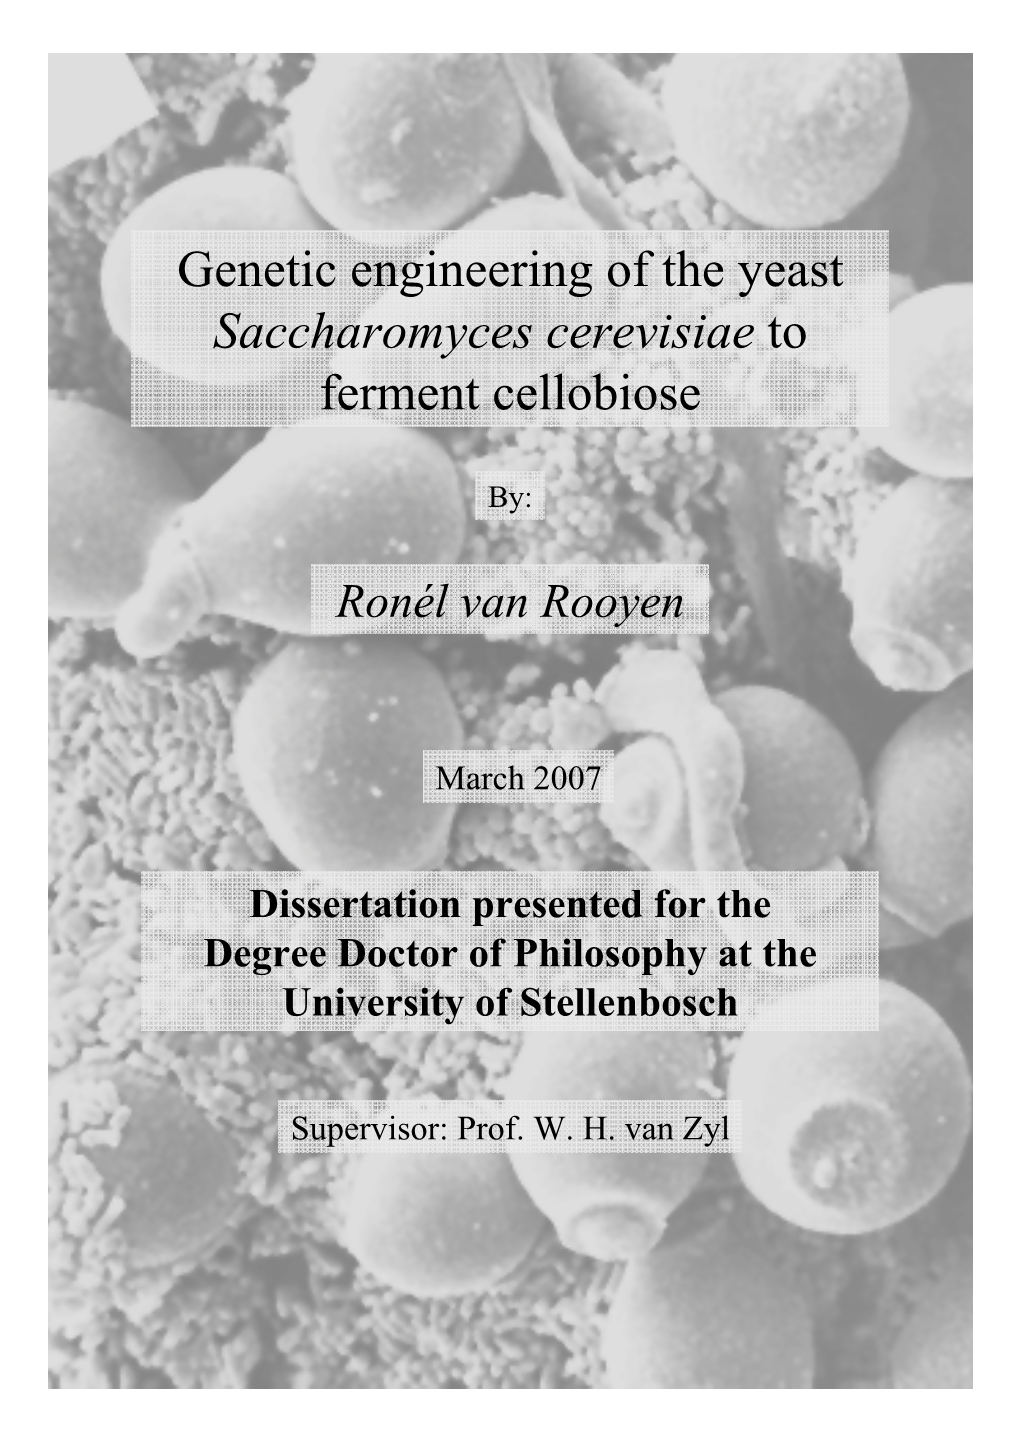 Genetic Engineering of the Yeast Saccharomyces Cerevisiae to Ferment Cellobiose